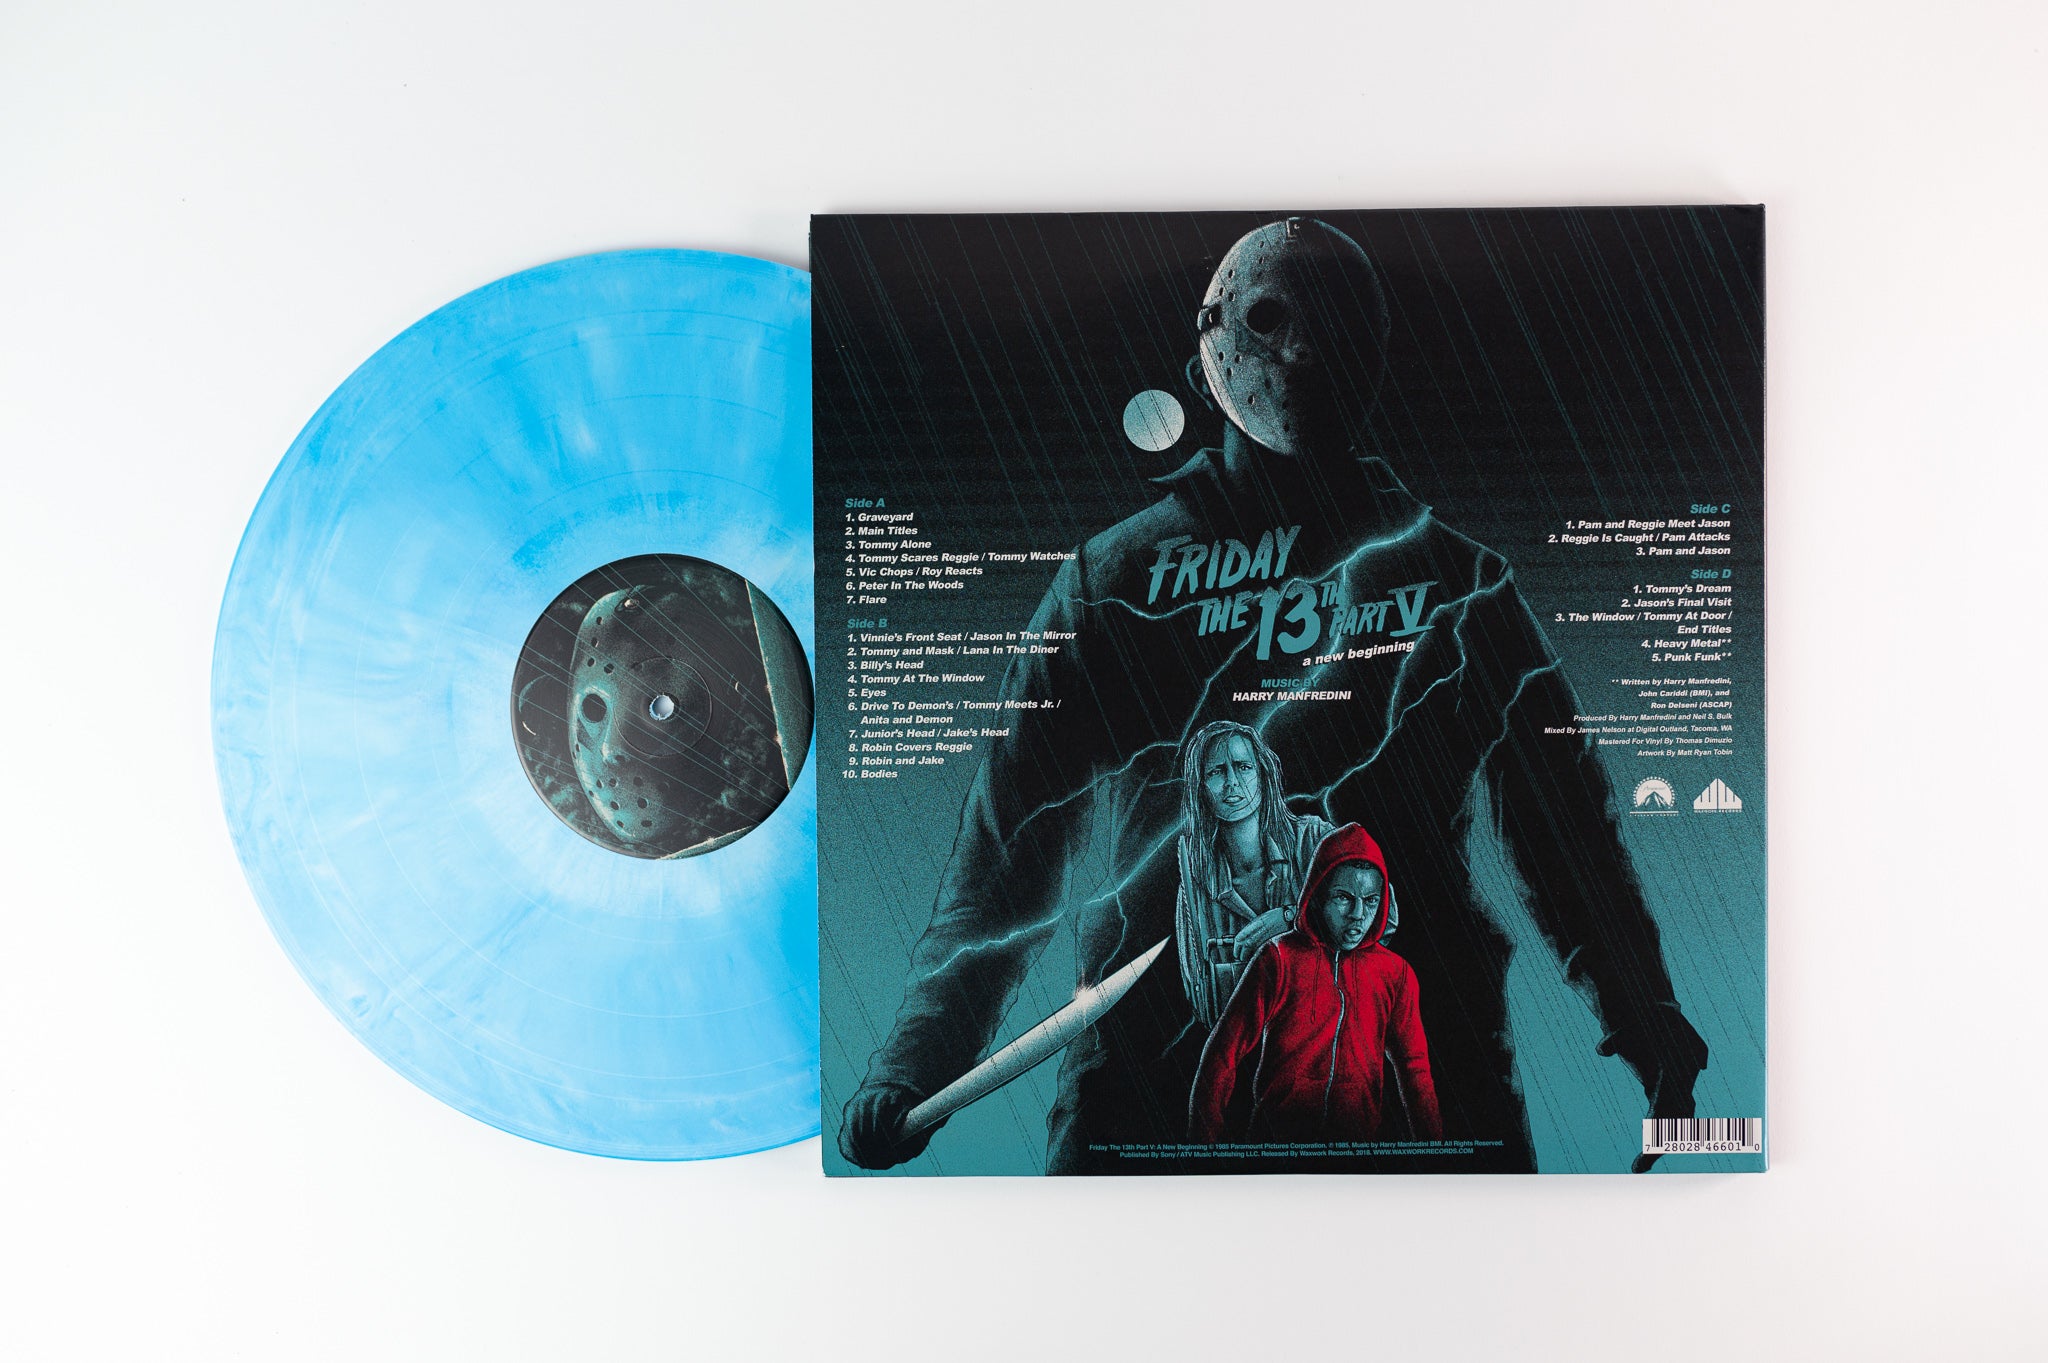 Harry Manfredini - Friday The 13th Part V: A New Beginning on Waxwork - Colored Vinyl